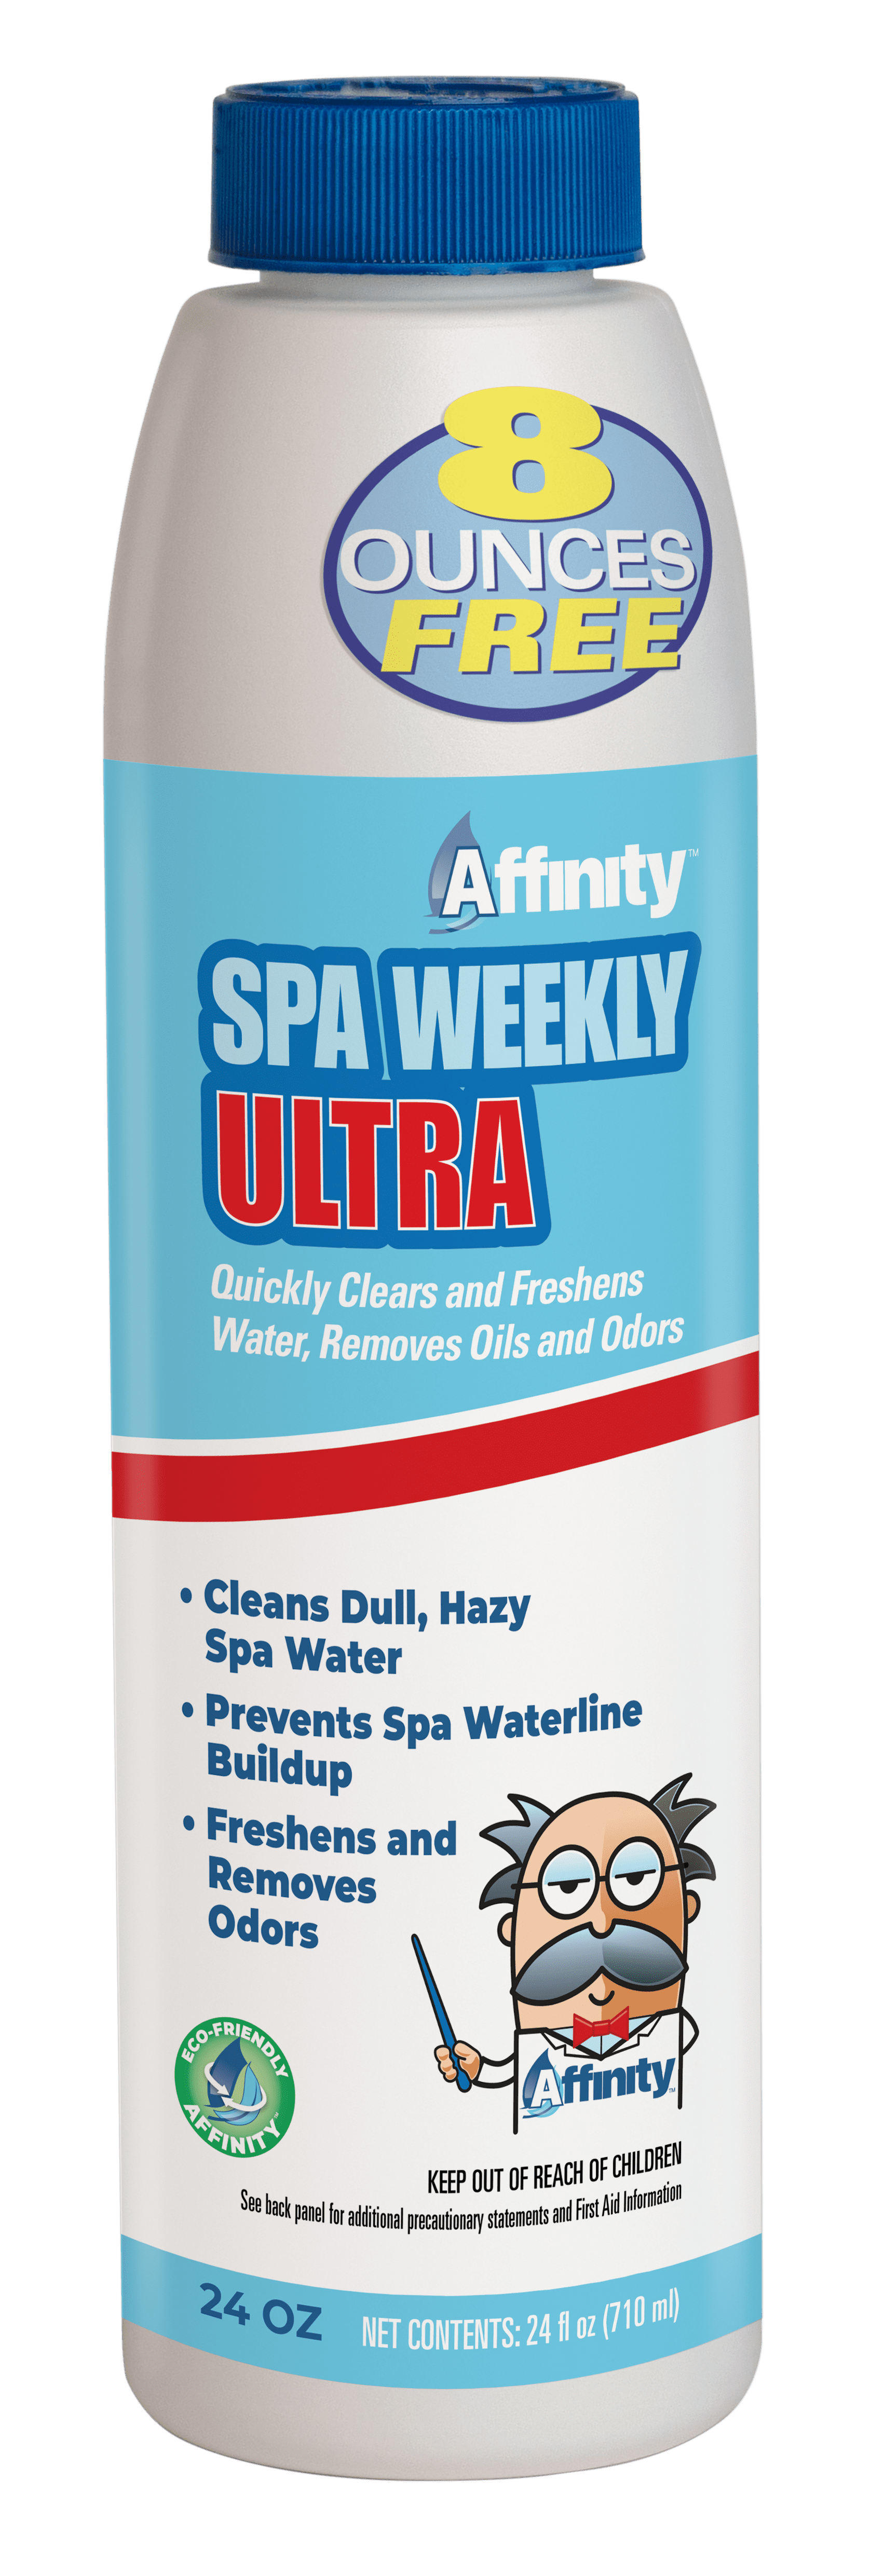 Affinity Spa Weekly Ultra